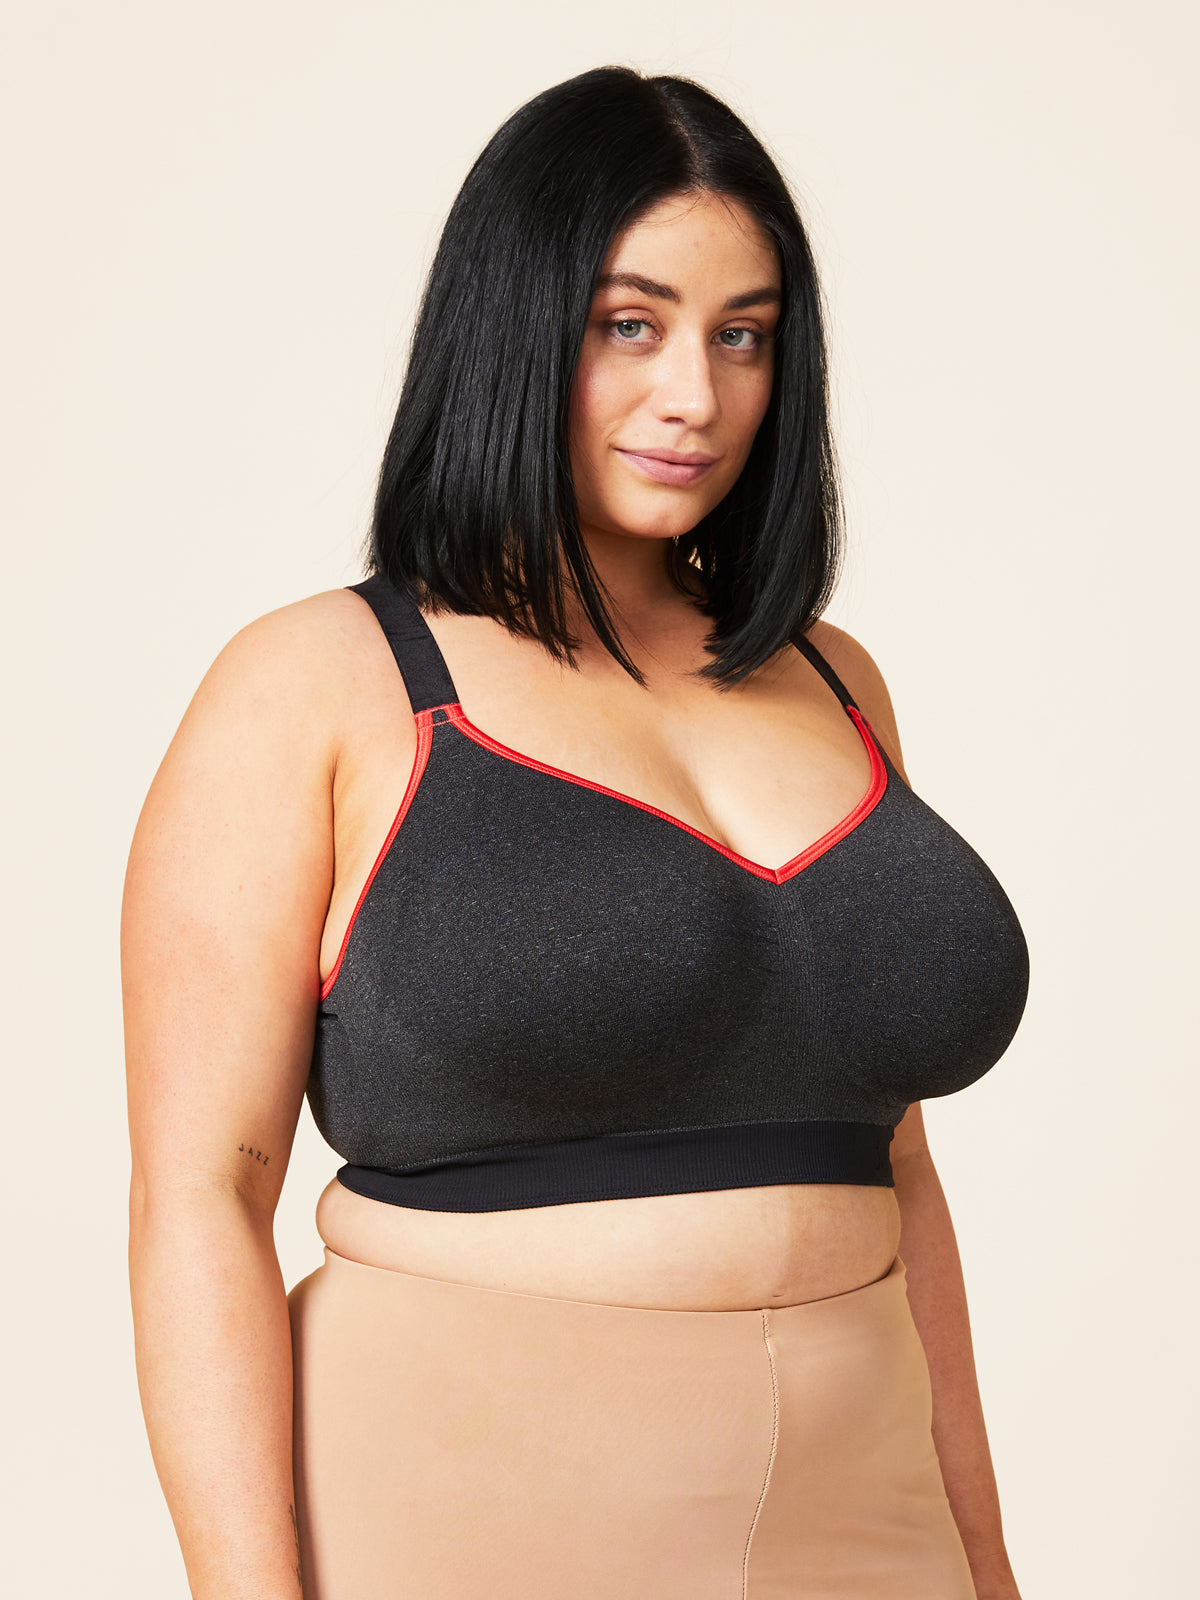 Shop All — Bras & Tanks for Big Boobs